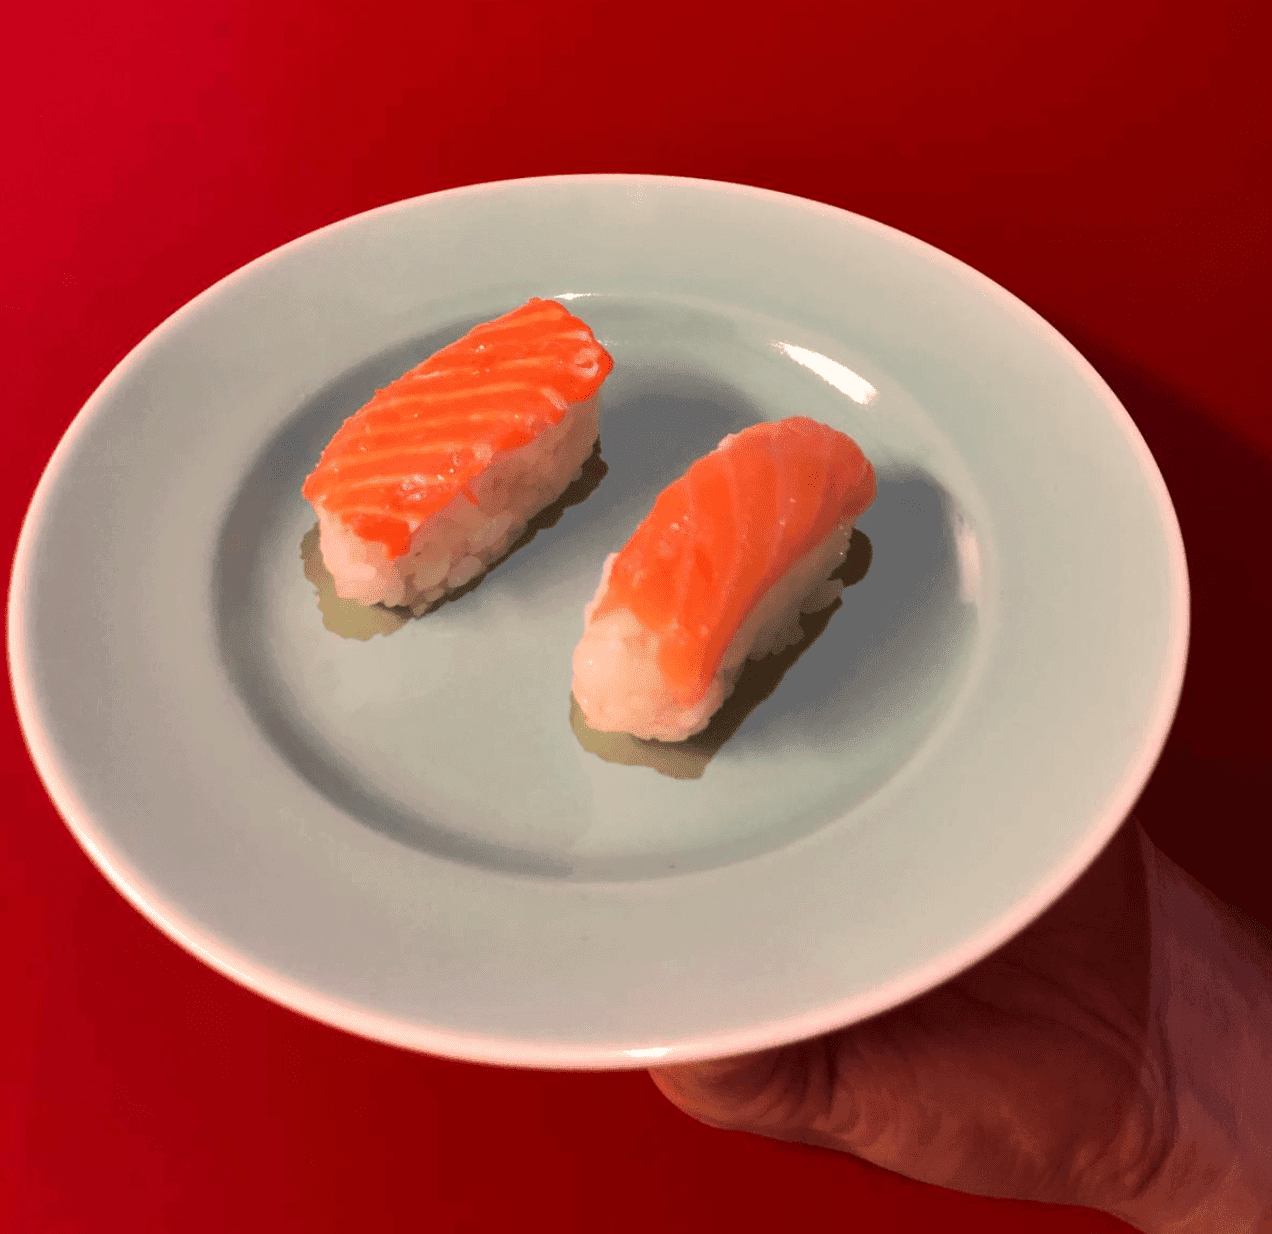 Revo Foods Wants To Build a 3D Printing Facility For Plant-Based Fish